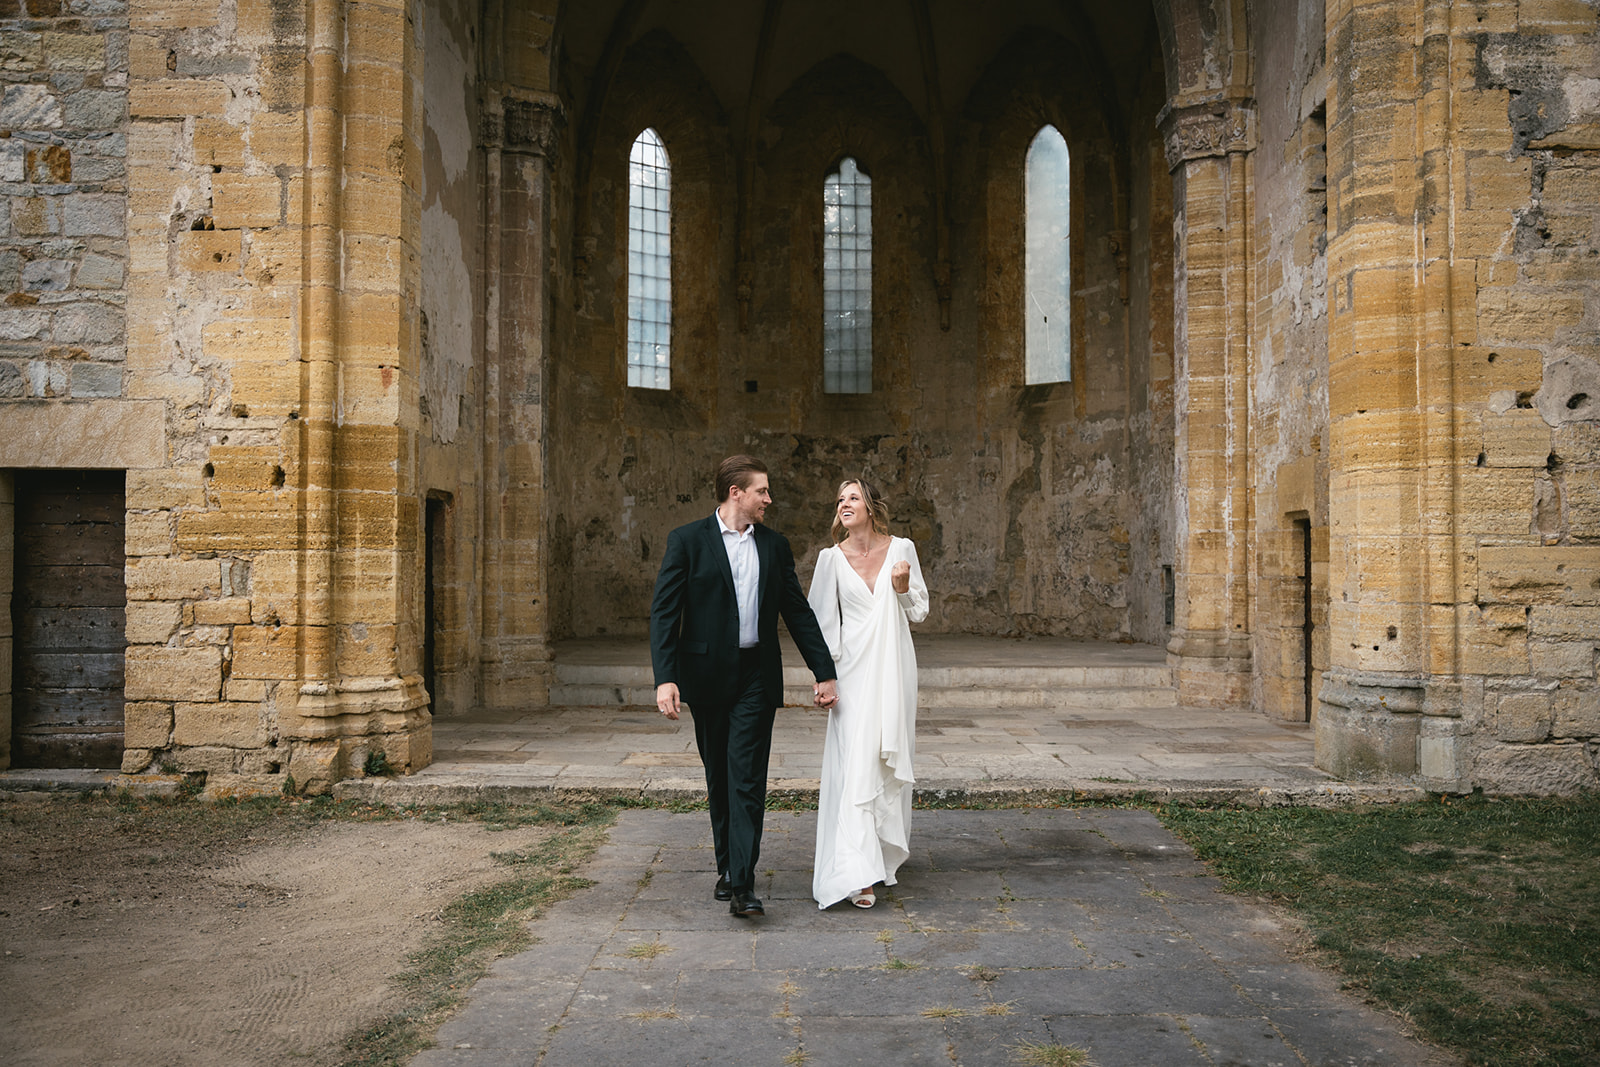 Elopement ceremony in a church ruin in France